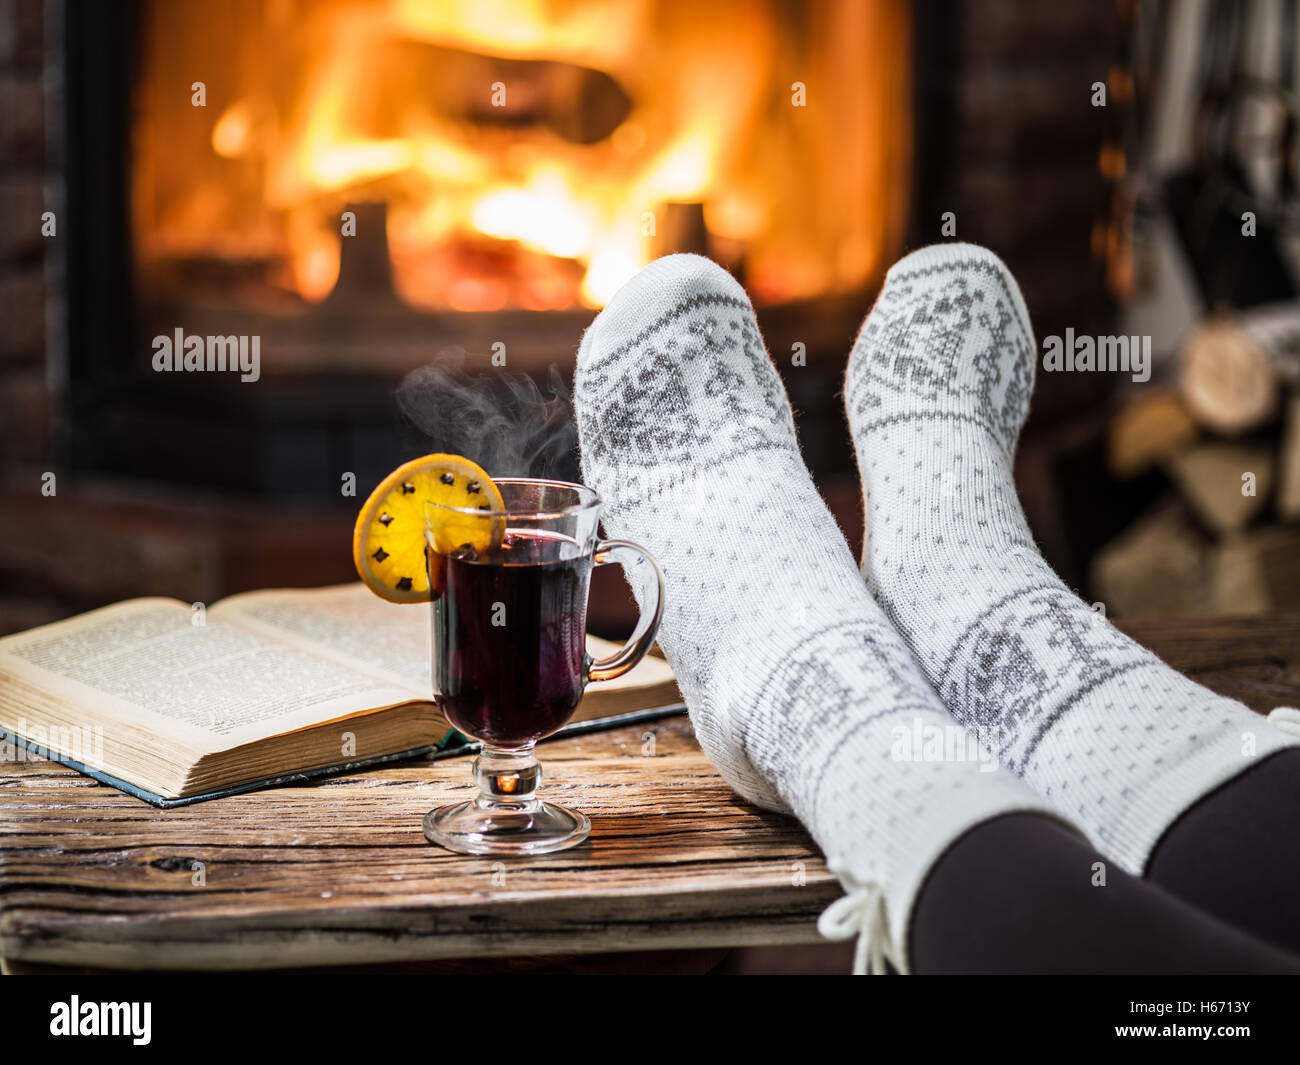 feet warming up on fireplace - a Royalty Free Stock Photo from